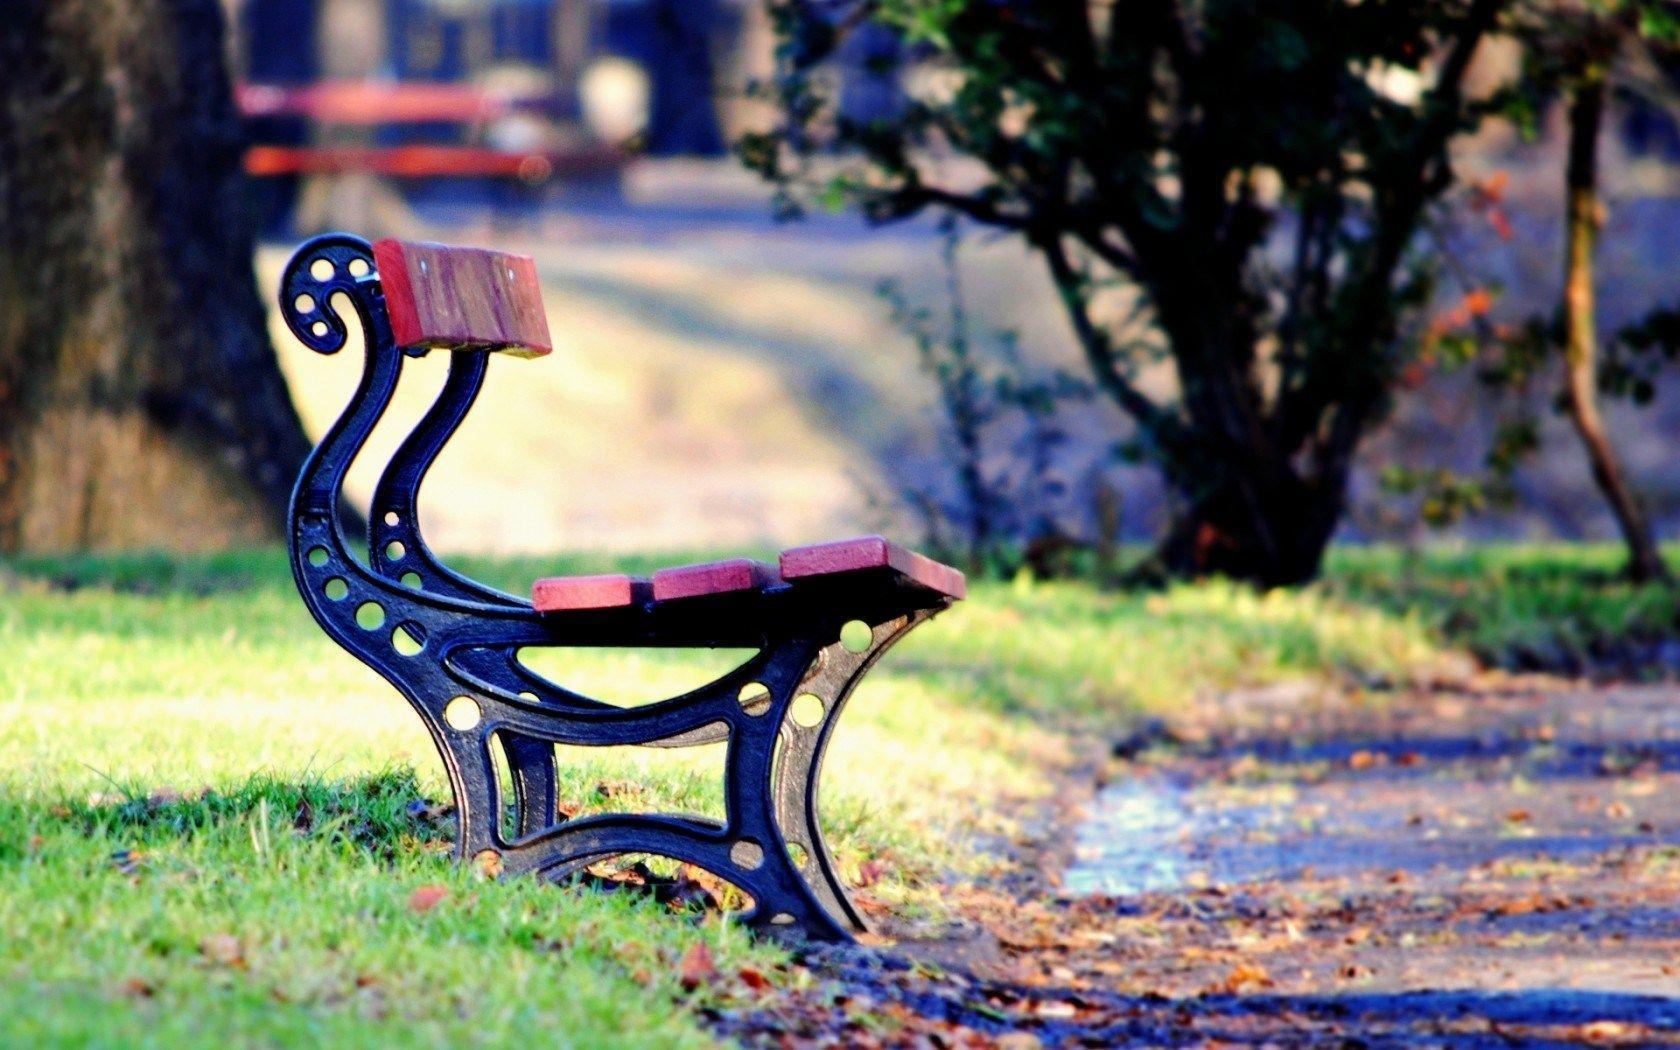 Awesome Park Bench Background Wall Paper. Park Bench Background